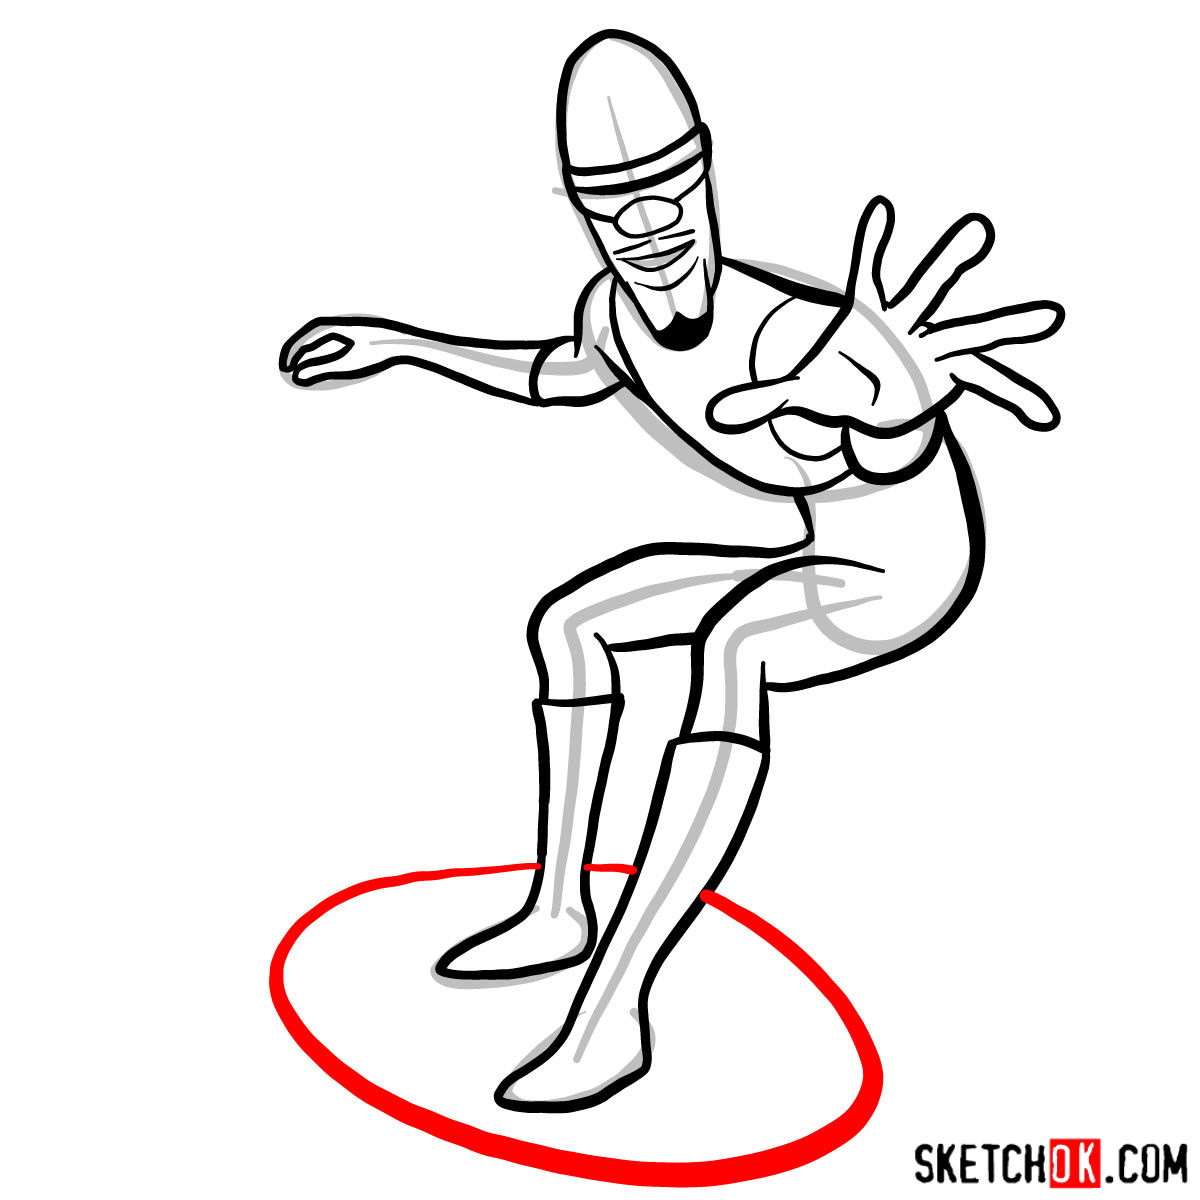 How to draw Lucius Best (Frozone) - step 11